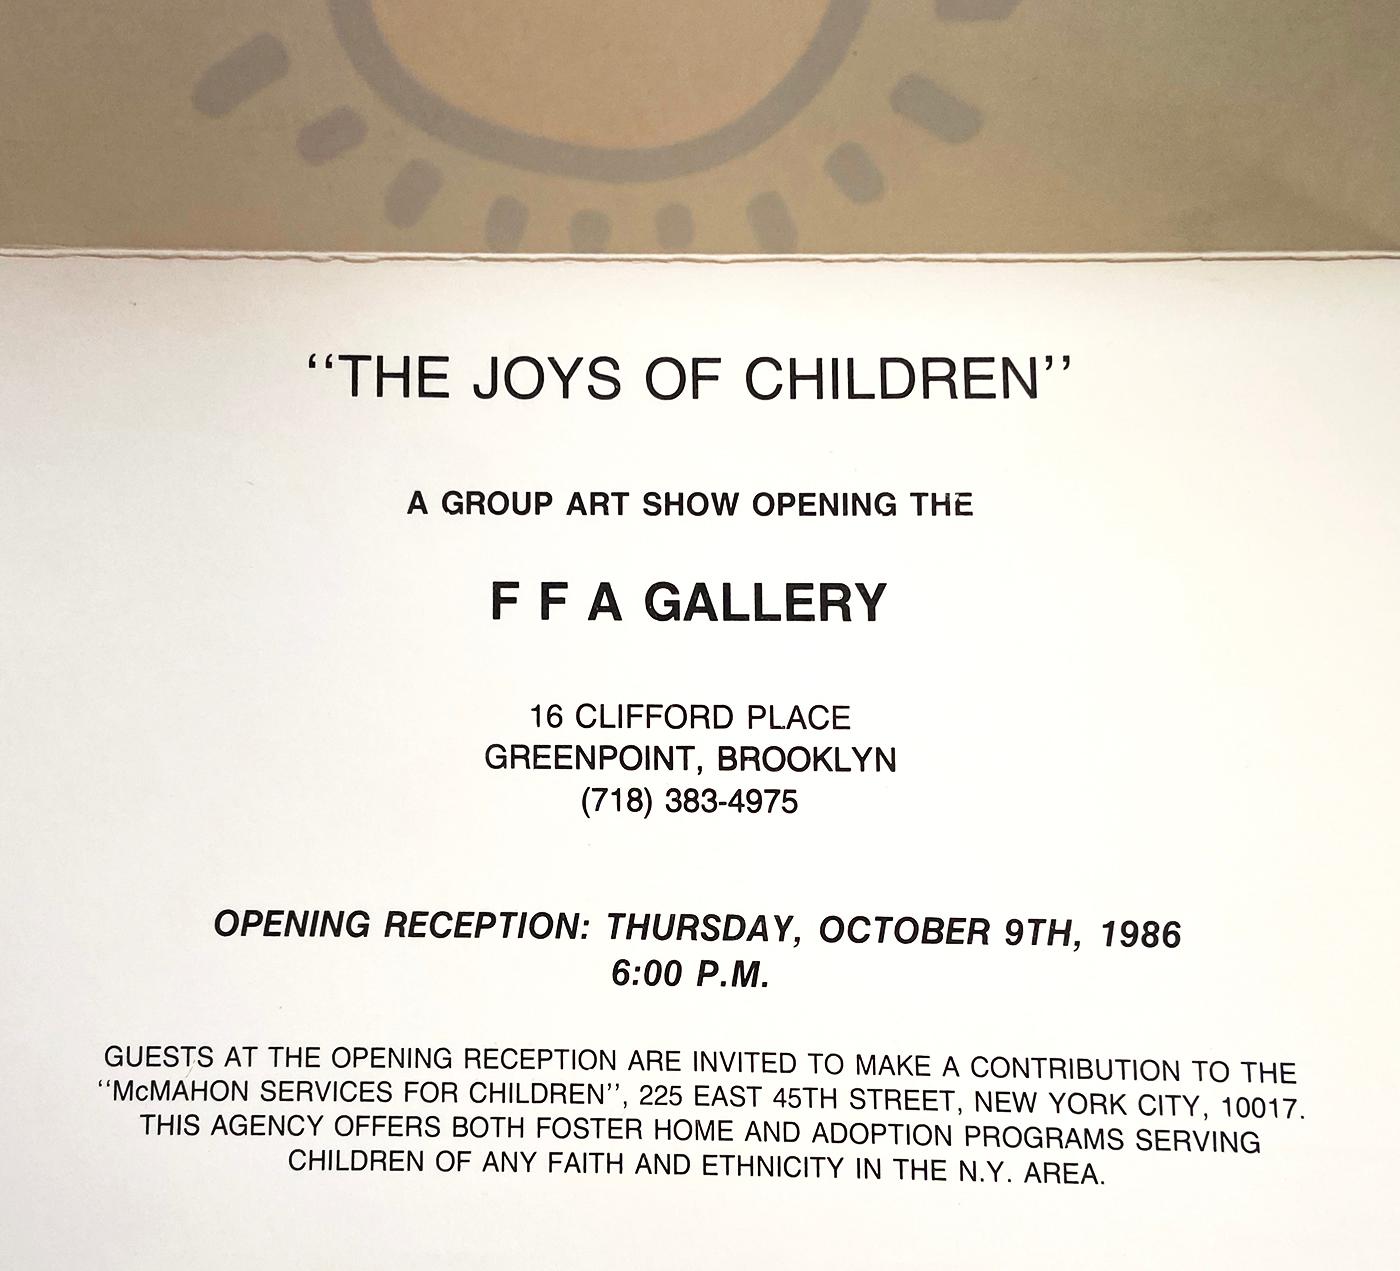 1980s Keith Haring gallery announcement (Keith Haring Brooklyn)  1